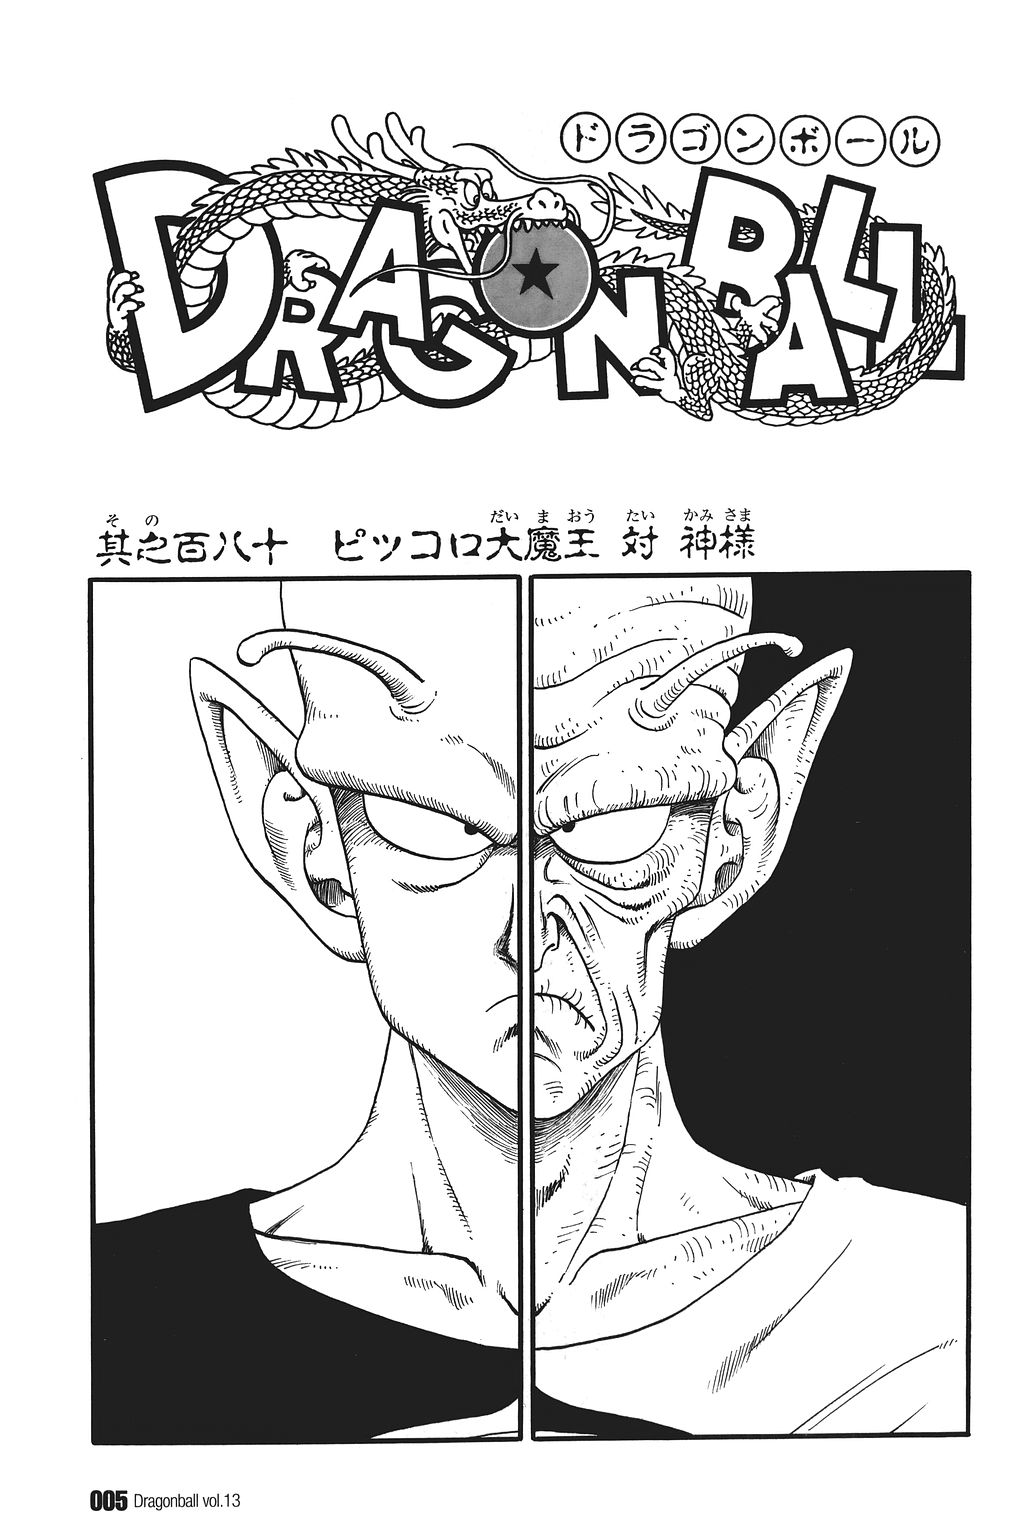 HOW TO DRAW KAMISAMA FROM DRAGON BALL 